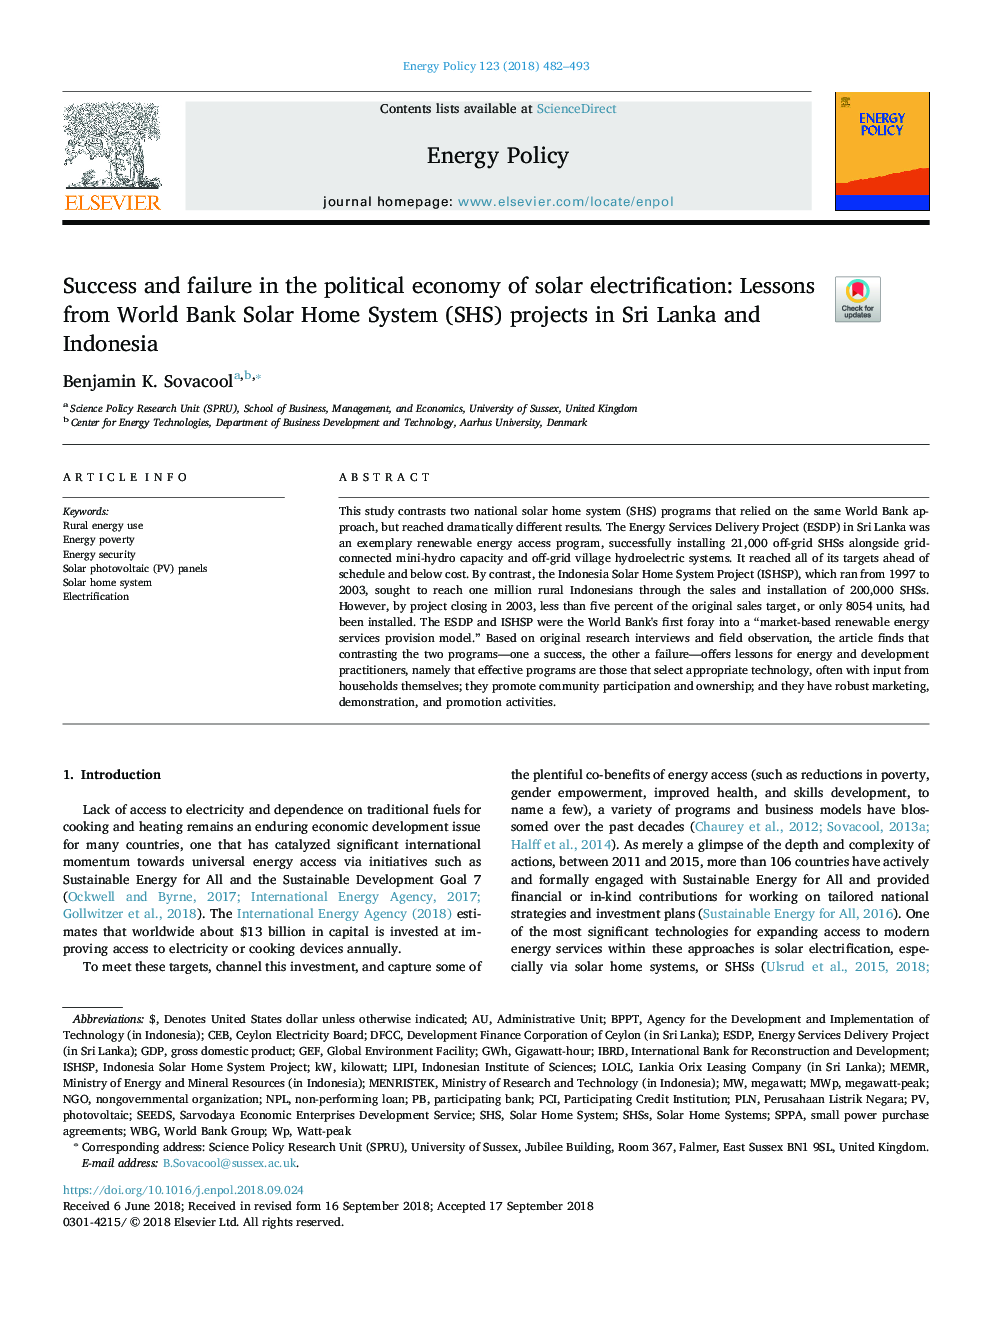 Success and failure in the political economy of solar electrification: Lessons from World Bank Solar Home System (SHS) projects in Sri Lanka and Indonesia